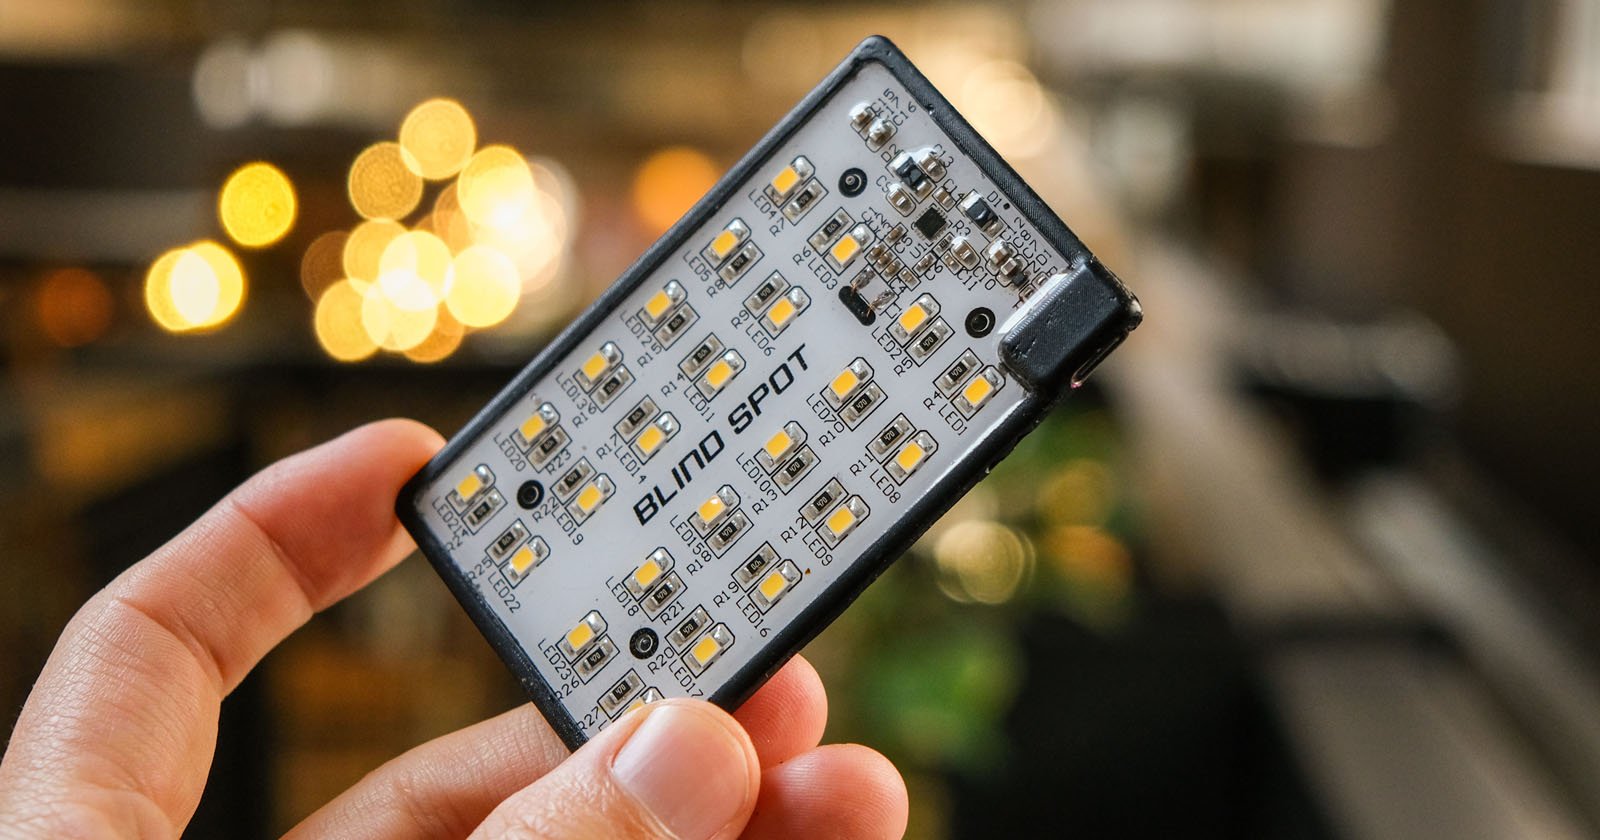 LumiCard Is a Compact Light That Magnetically Attaches to Your Phone